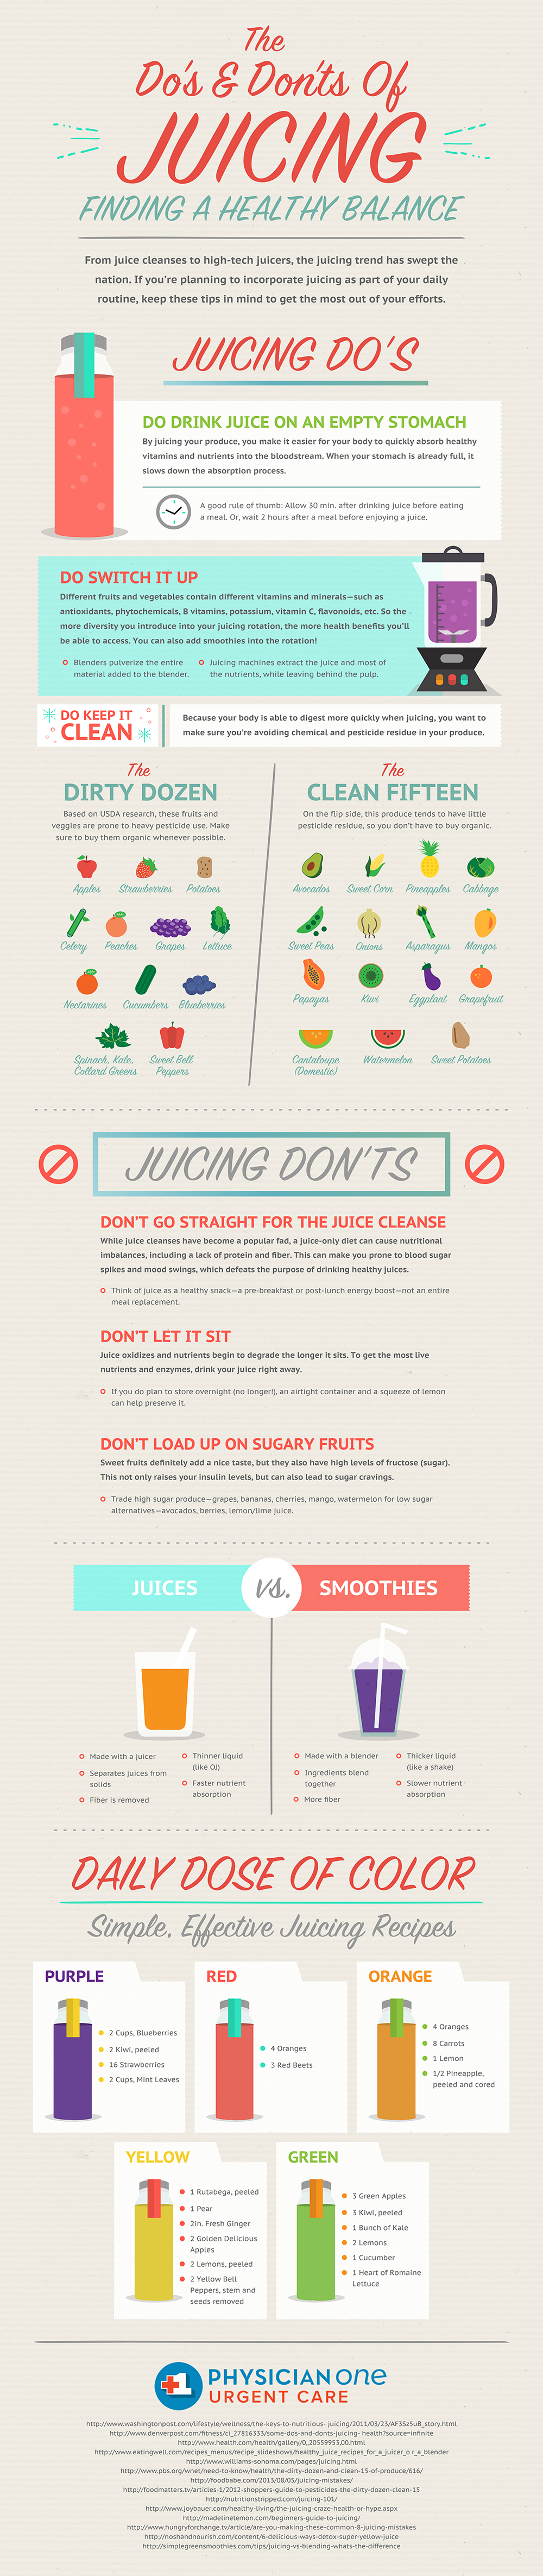 Do’s and Don’ts of Juicing